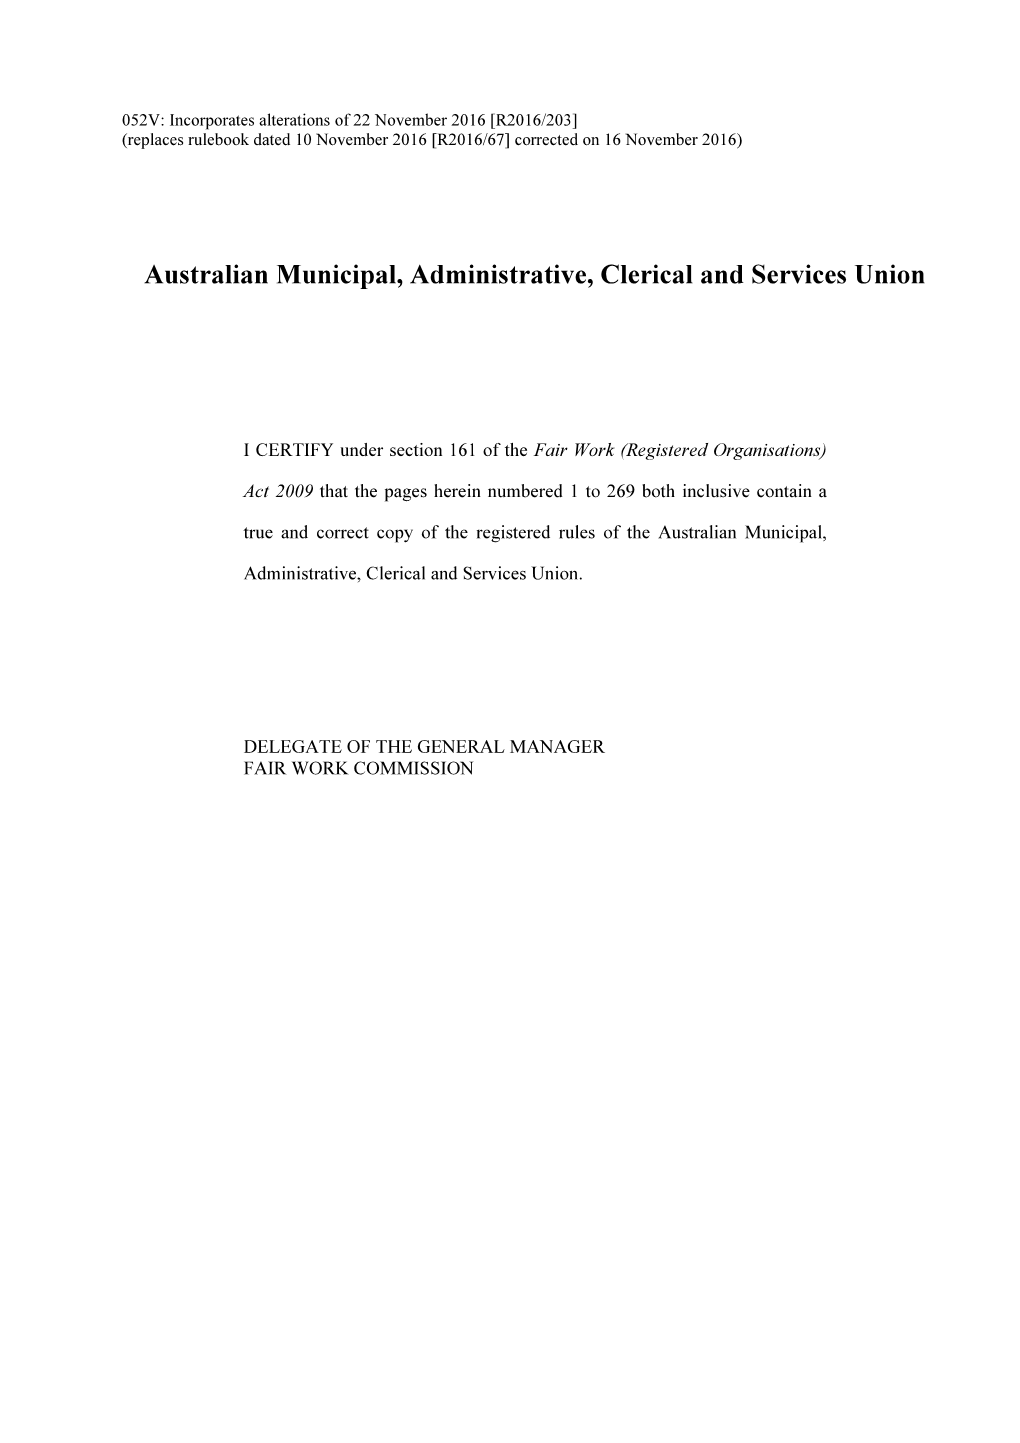 Australian Municipal, Administrative, Clerical and Services Union